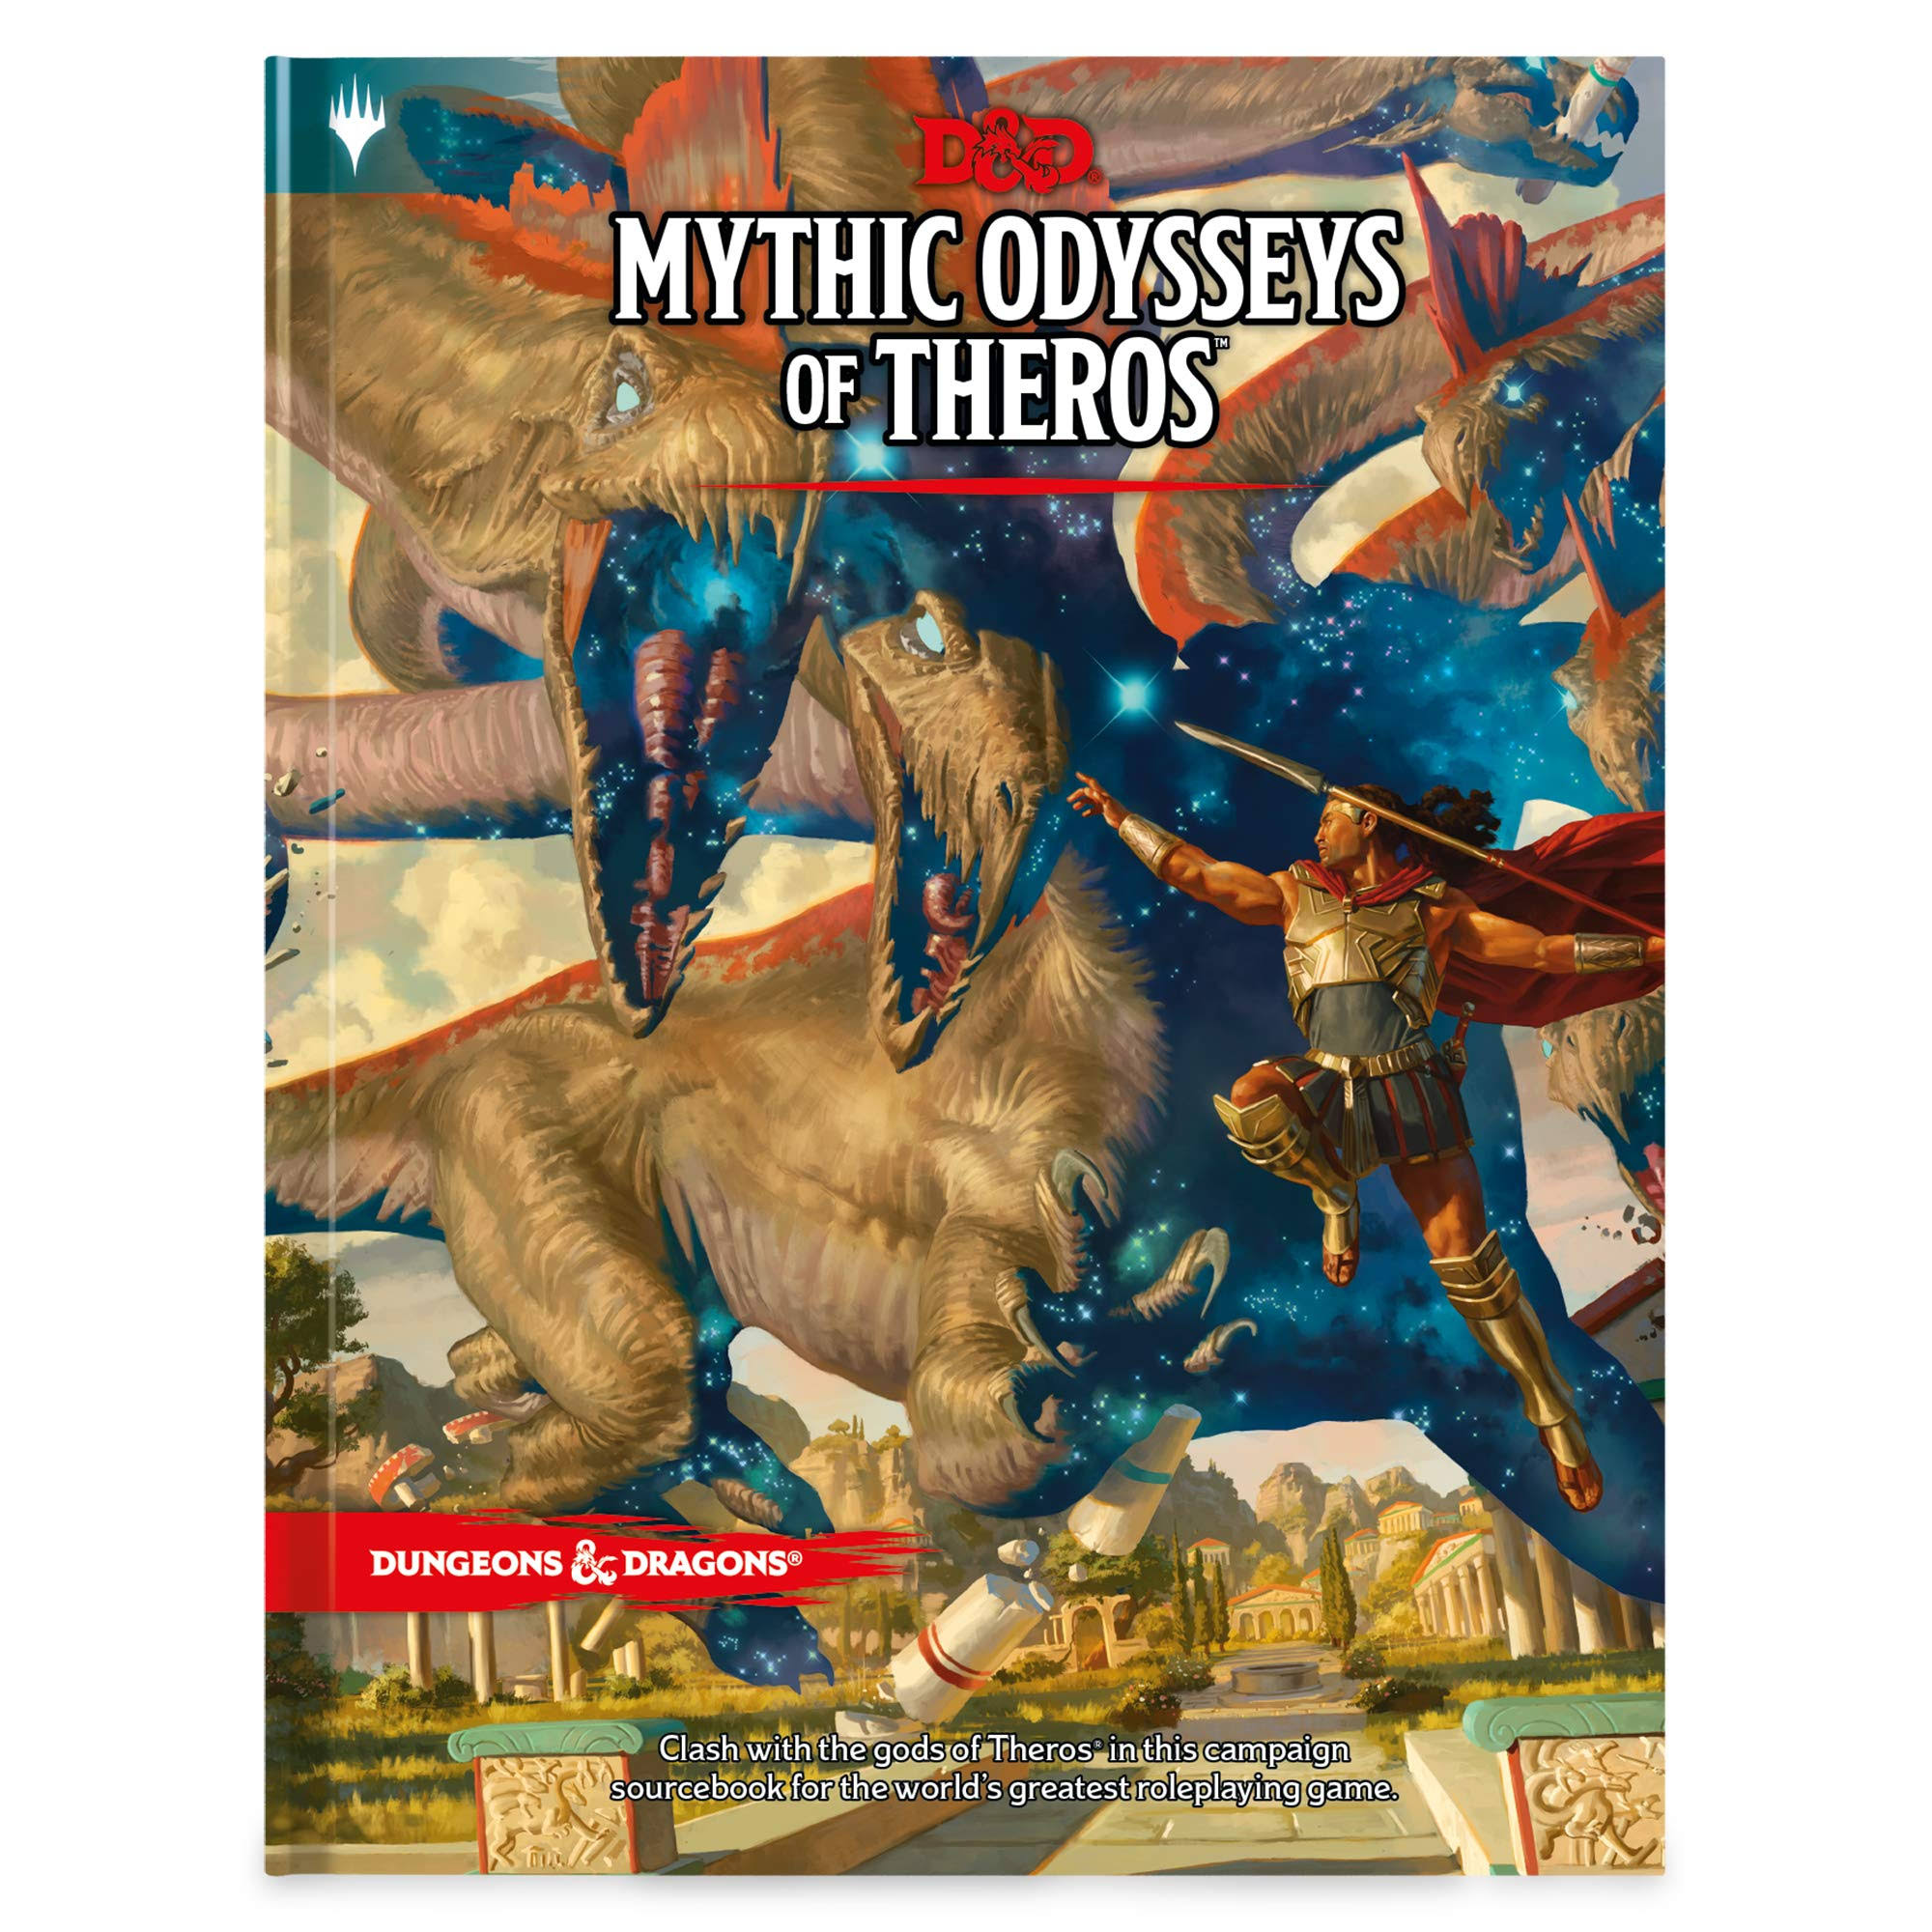 Dungeons & Dragons (D&D) Mythic Odysseys of Theros